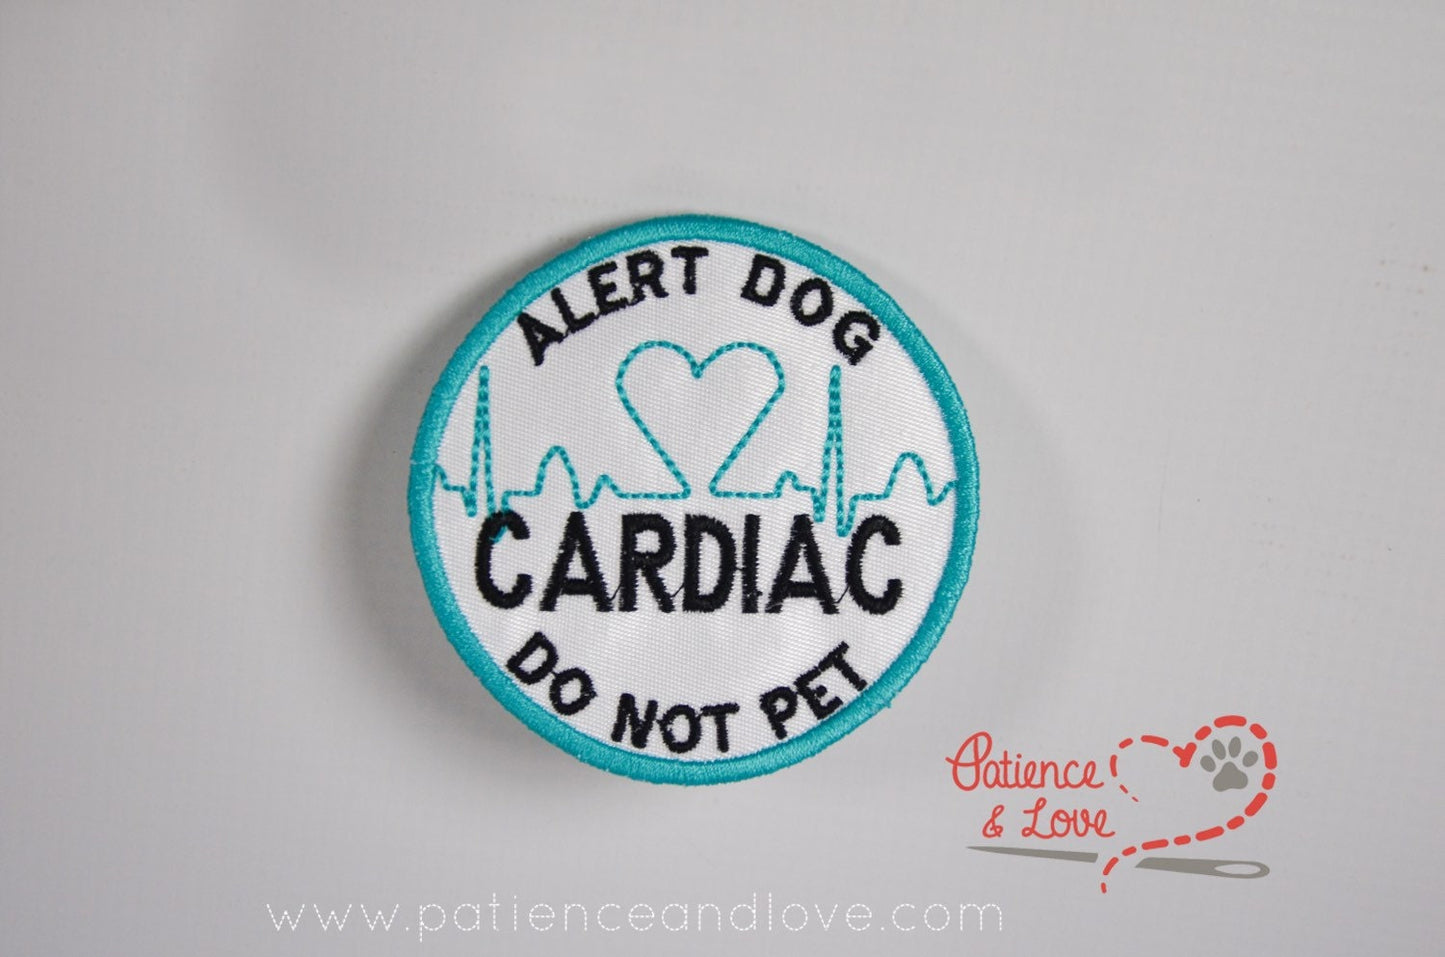 Alert Dog - Cardiac - Do not pet with ekg and heart, 3 inch round patch